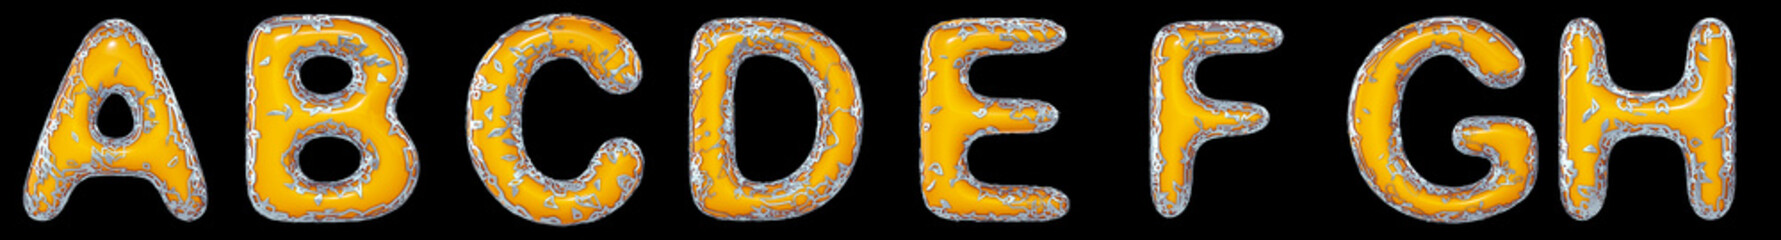 Realistic 3D letters set A, B, C, D, E, F, G, H made of gold shining metal letters.